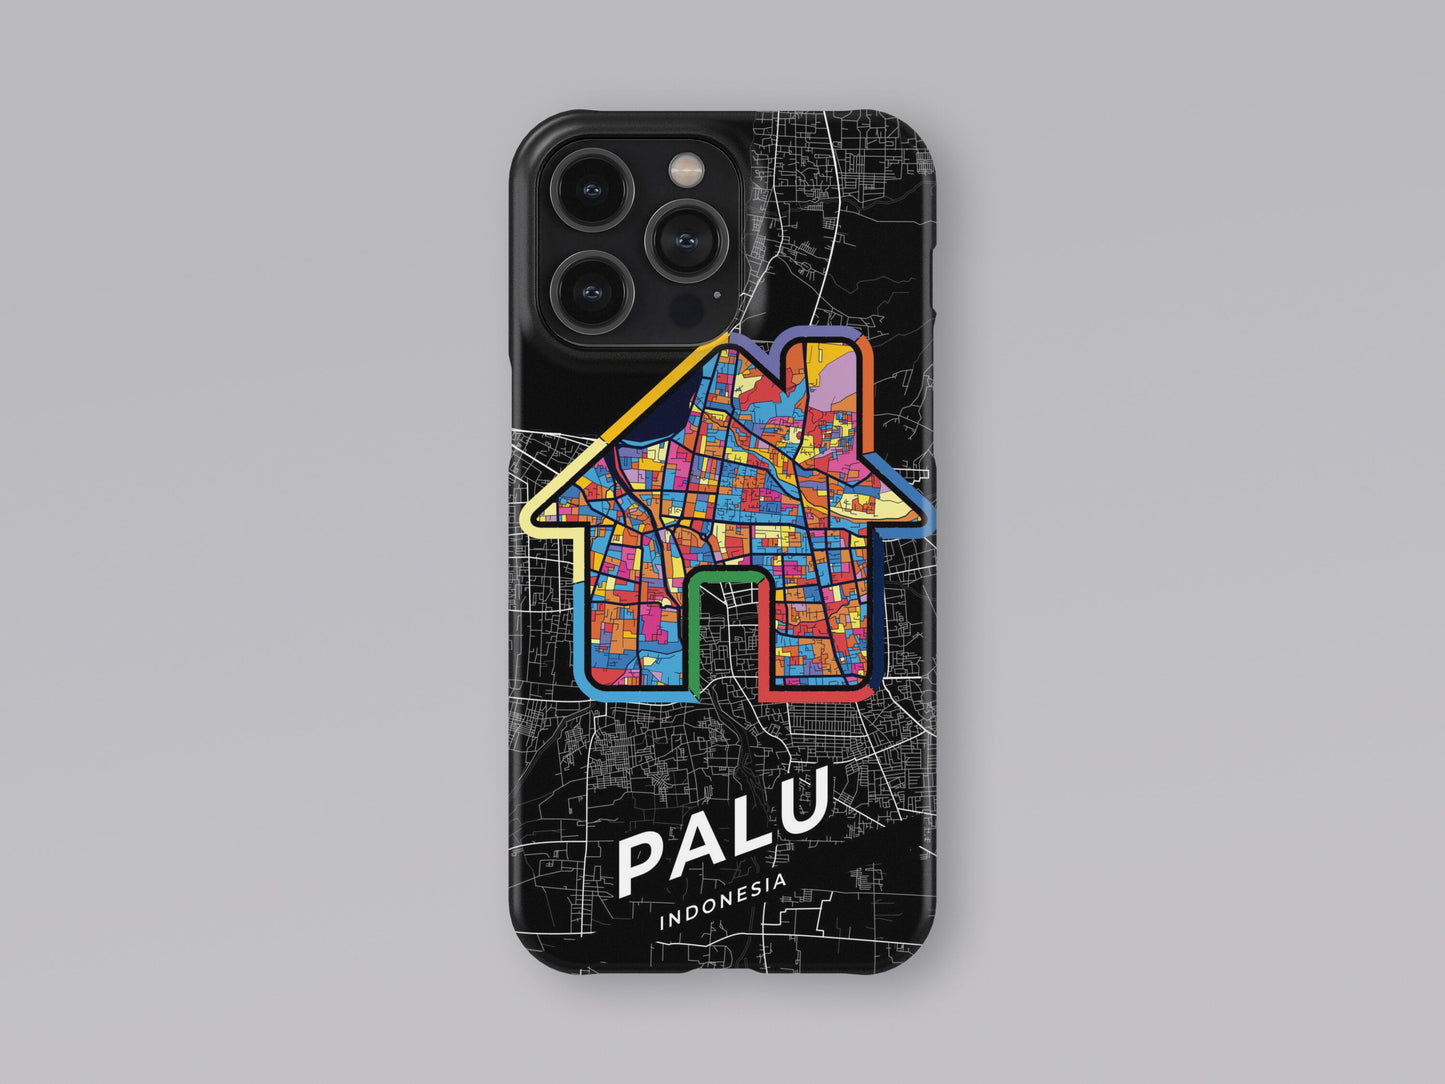 Palu Indonesia slim phone case with colorful icon 3